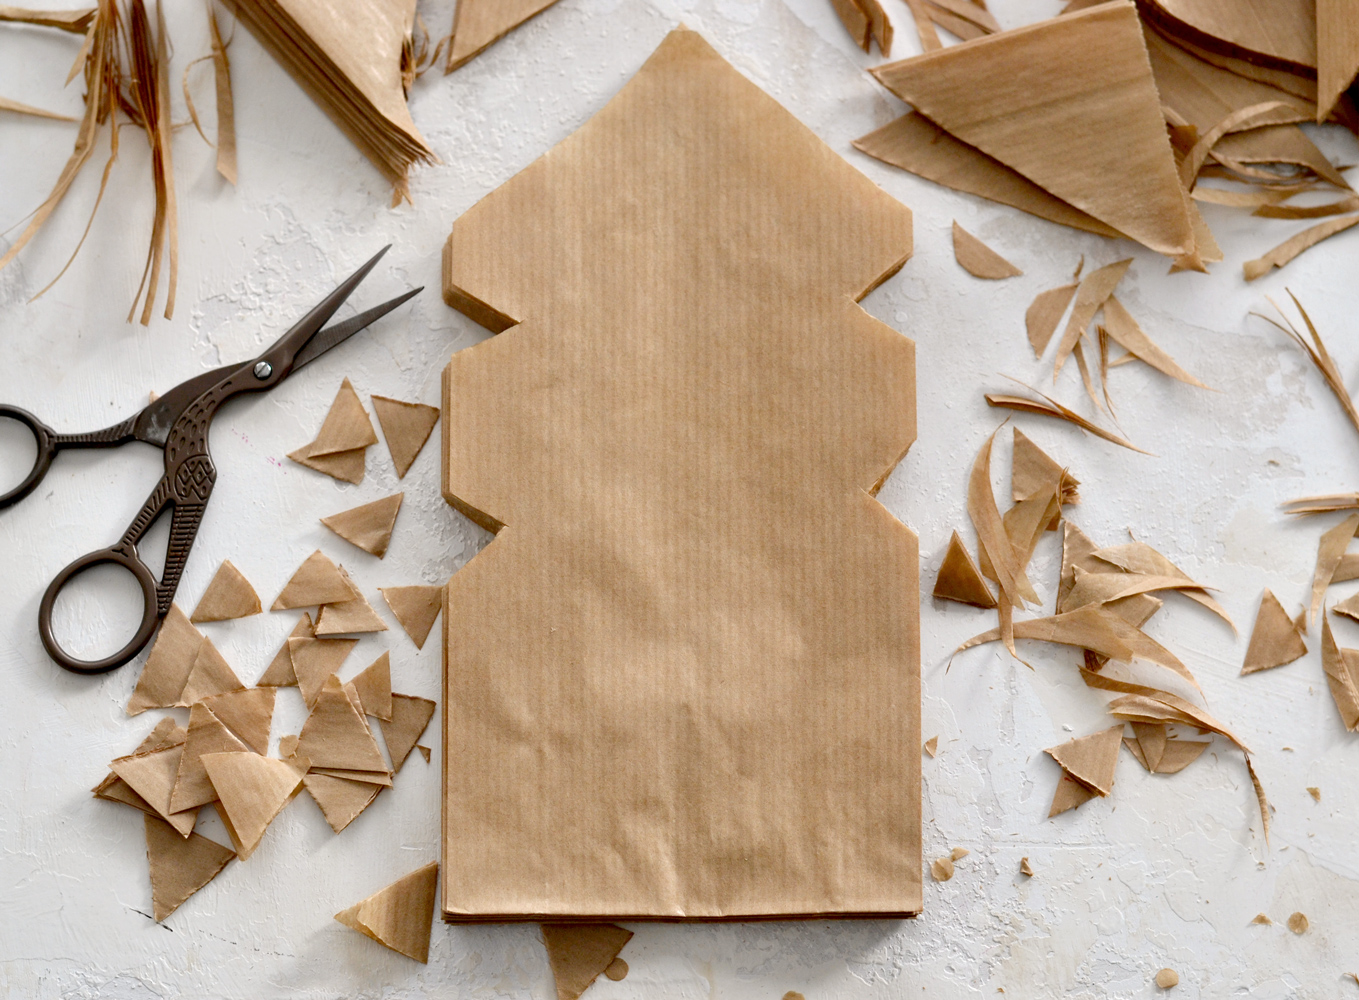 How to cut the design of the third paper bag star